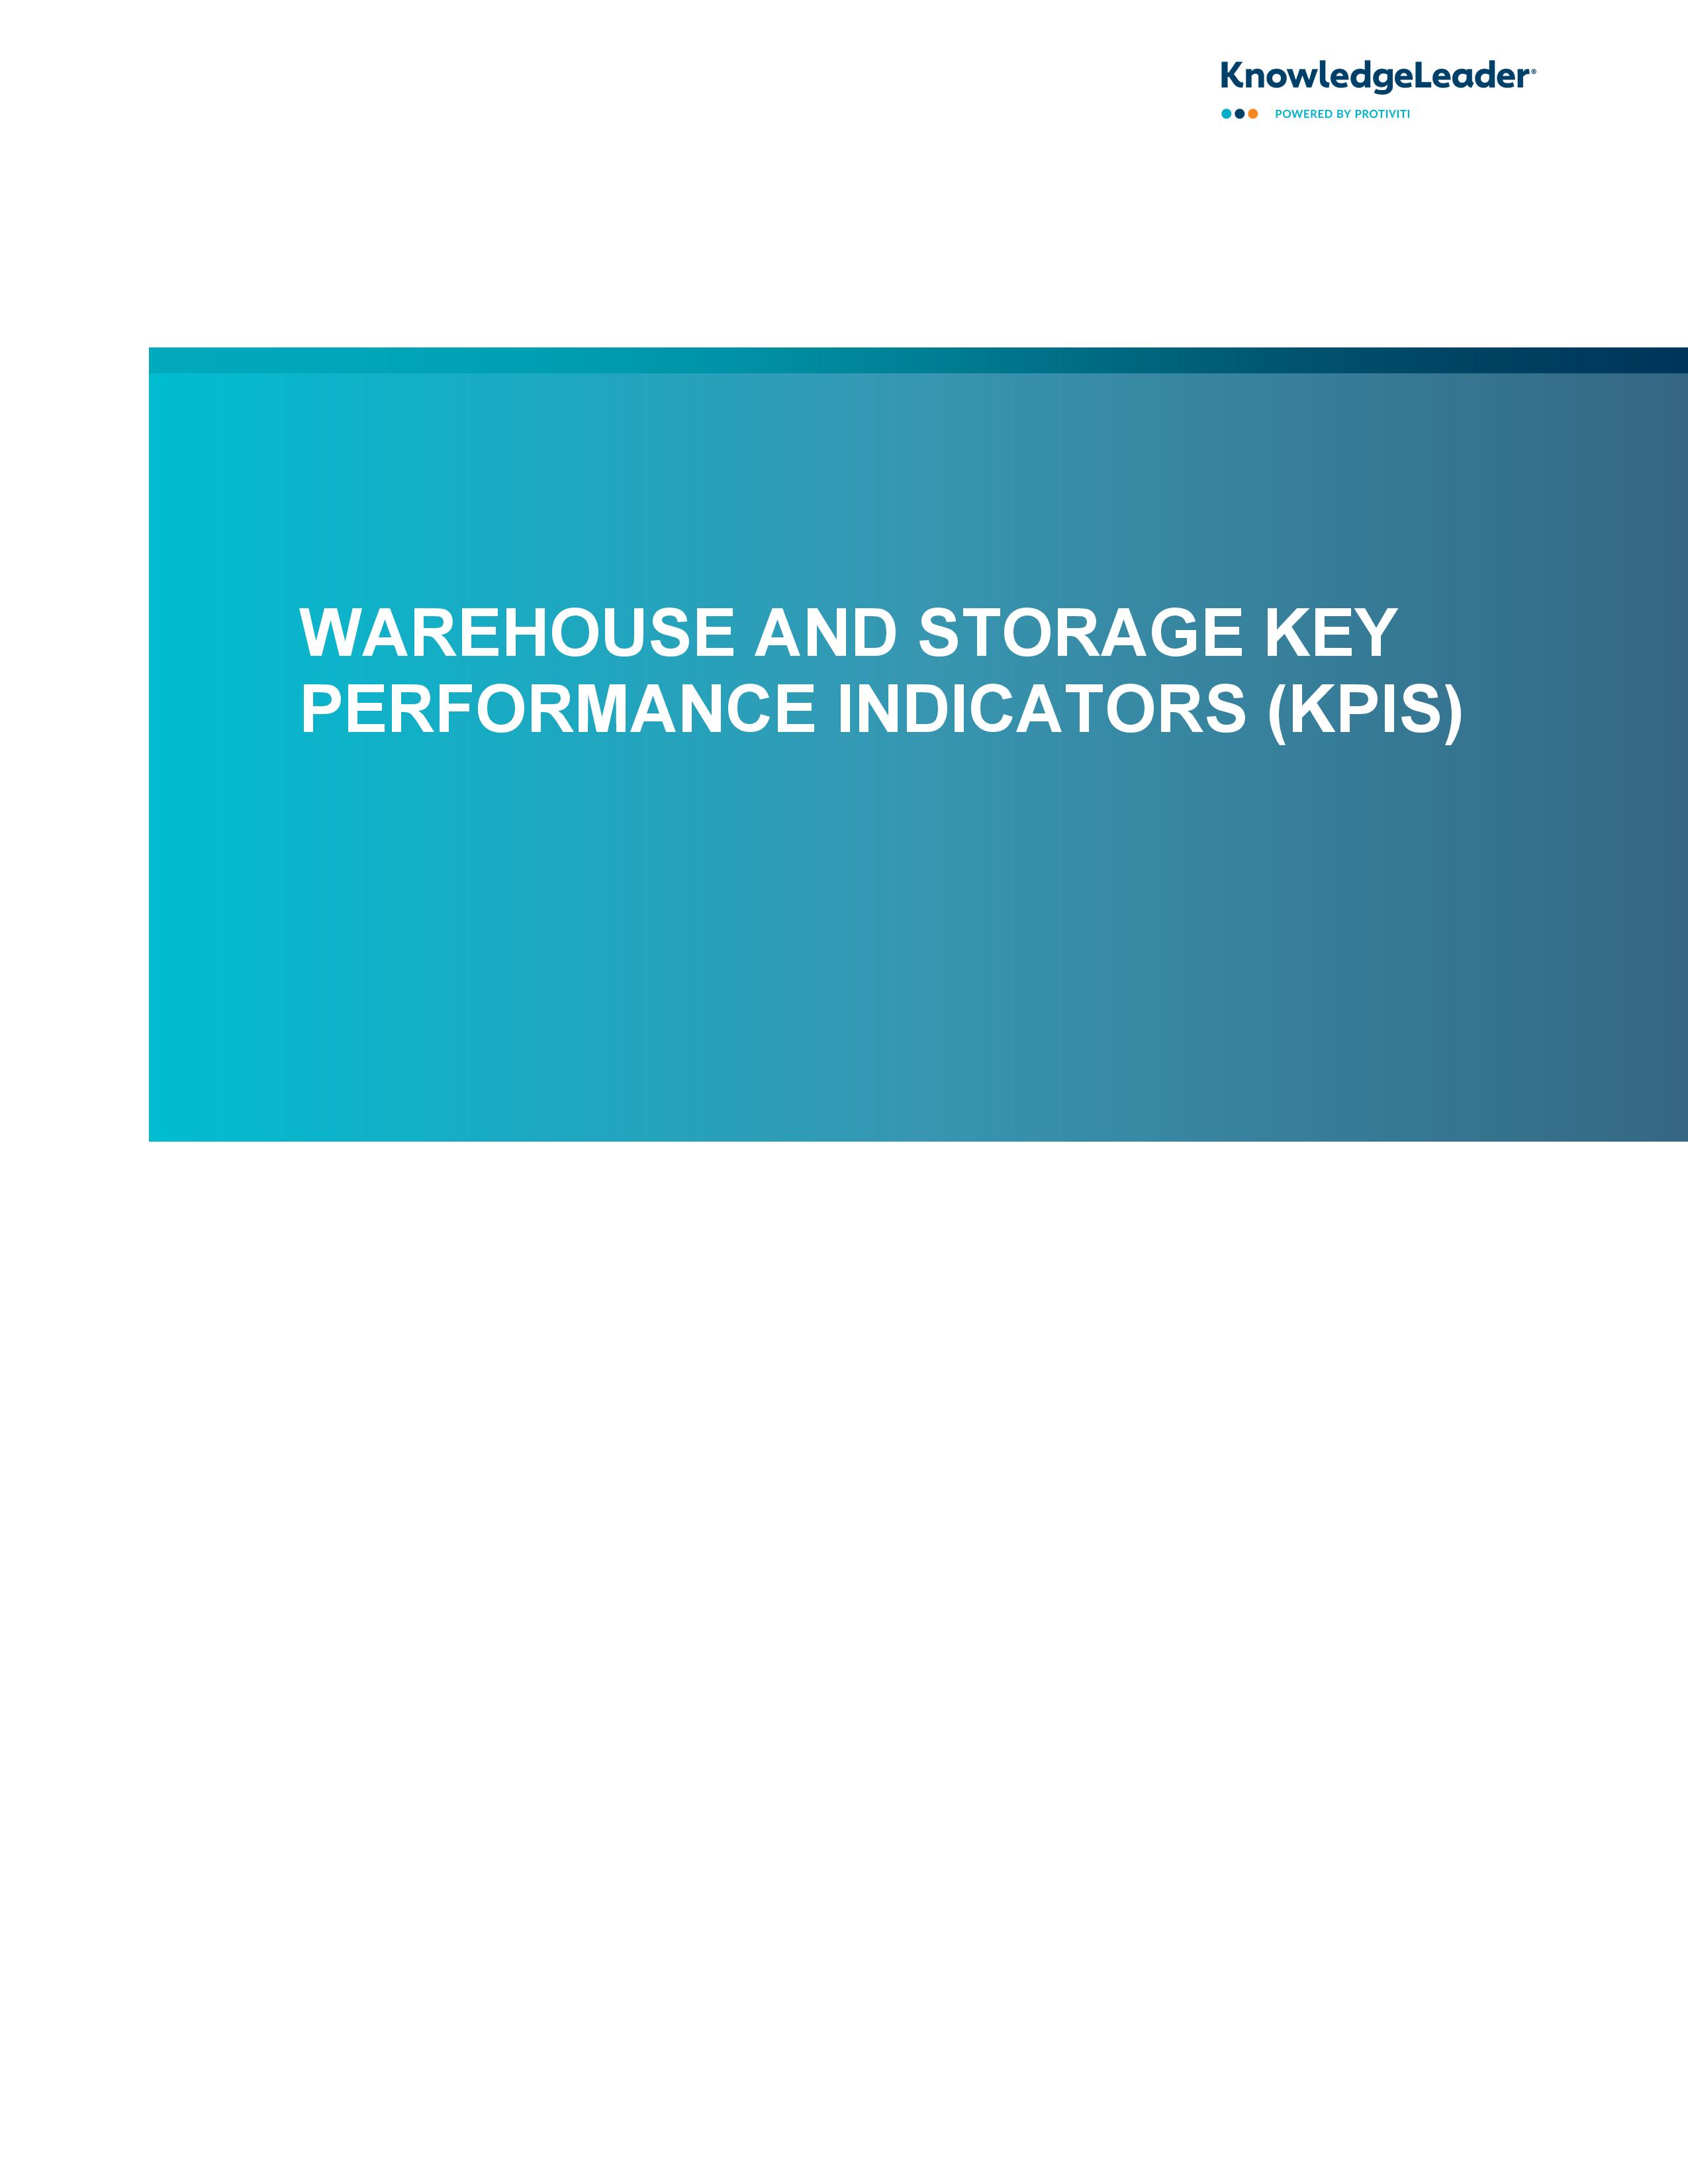 Screenshot of the first page of Warehouse and Storage Key Performance Indicators (KPIs)